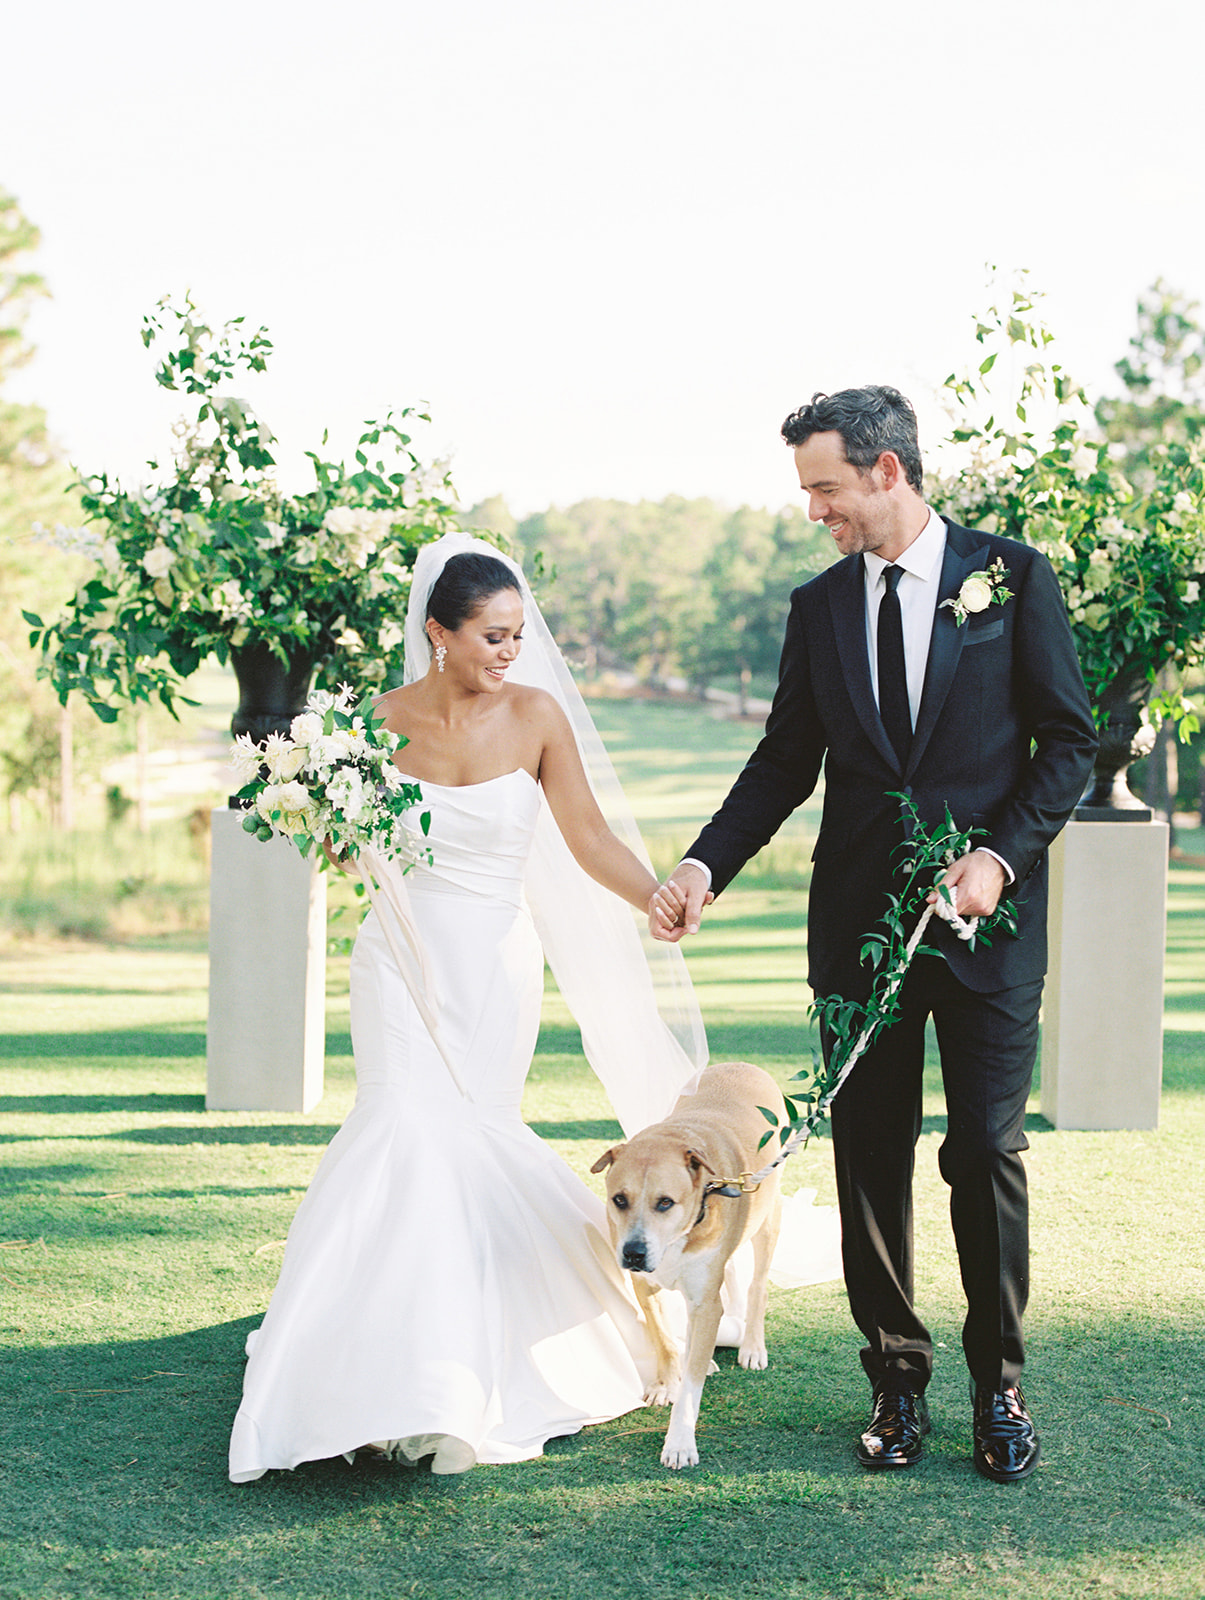 PGA golf tour player lanto griffin marries maya brown in beautiful wedding on golf course, exclusive wedding photos by Hannah Forsberg